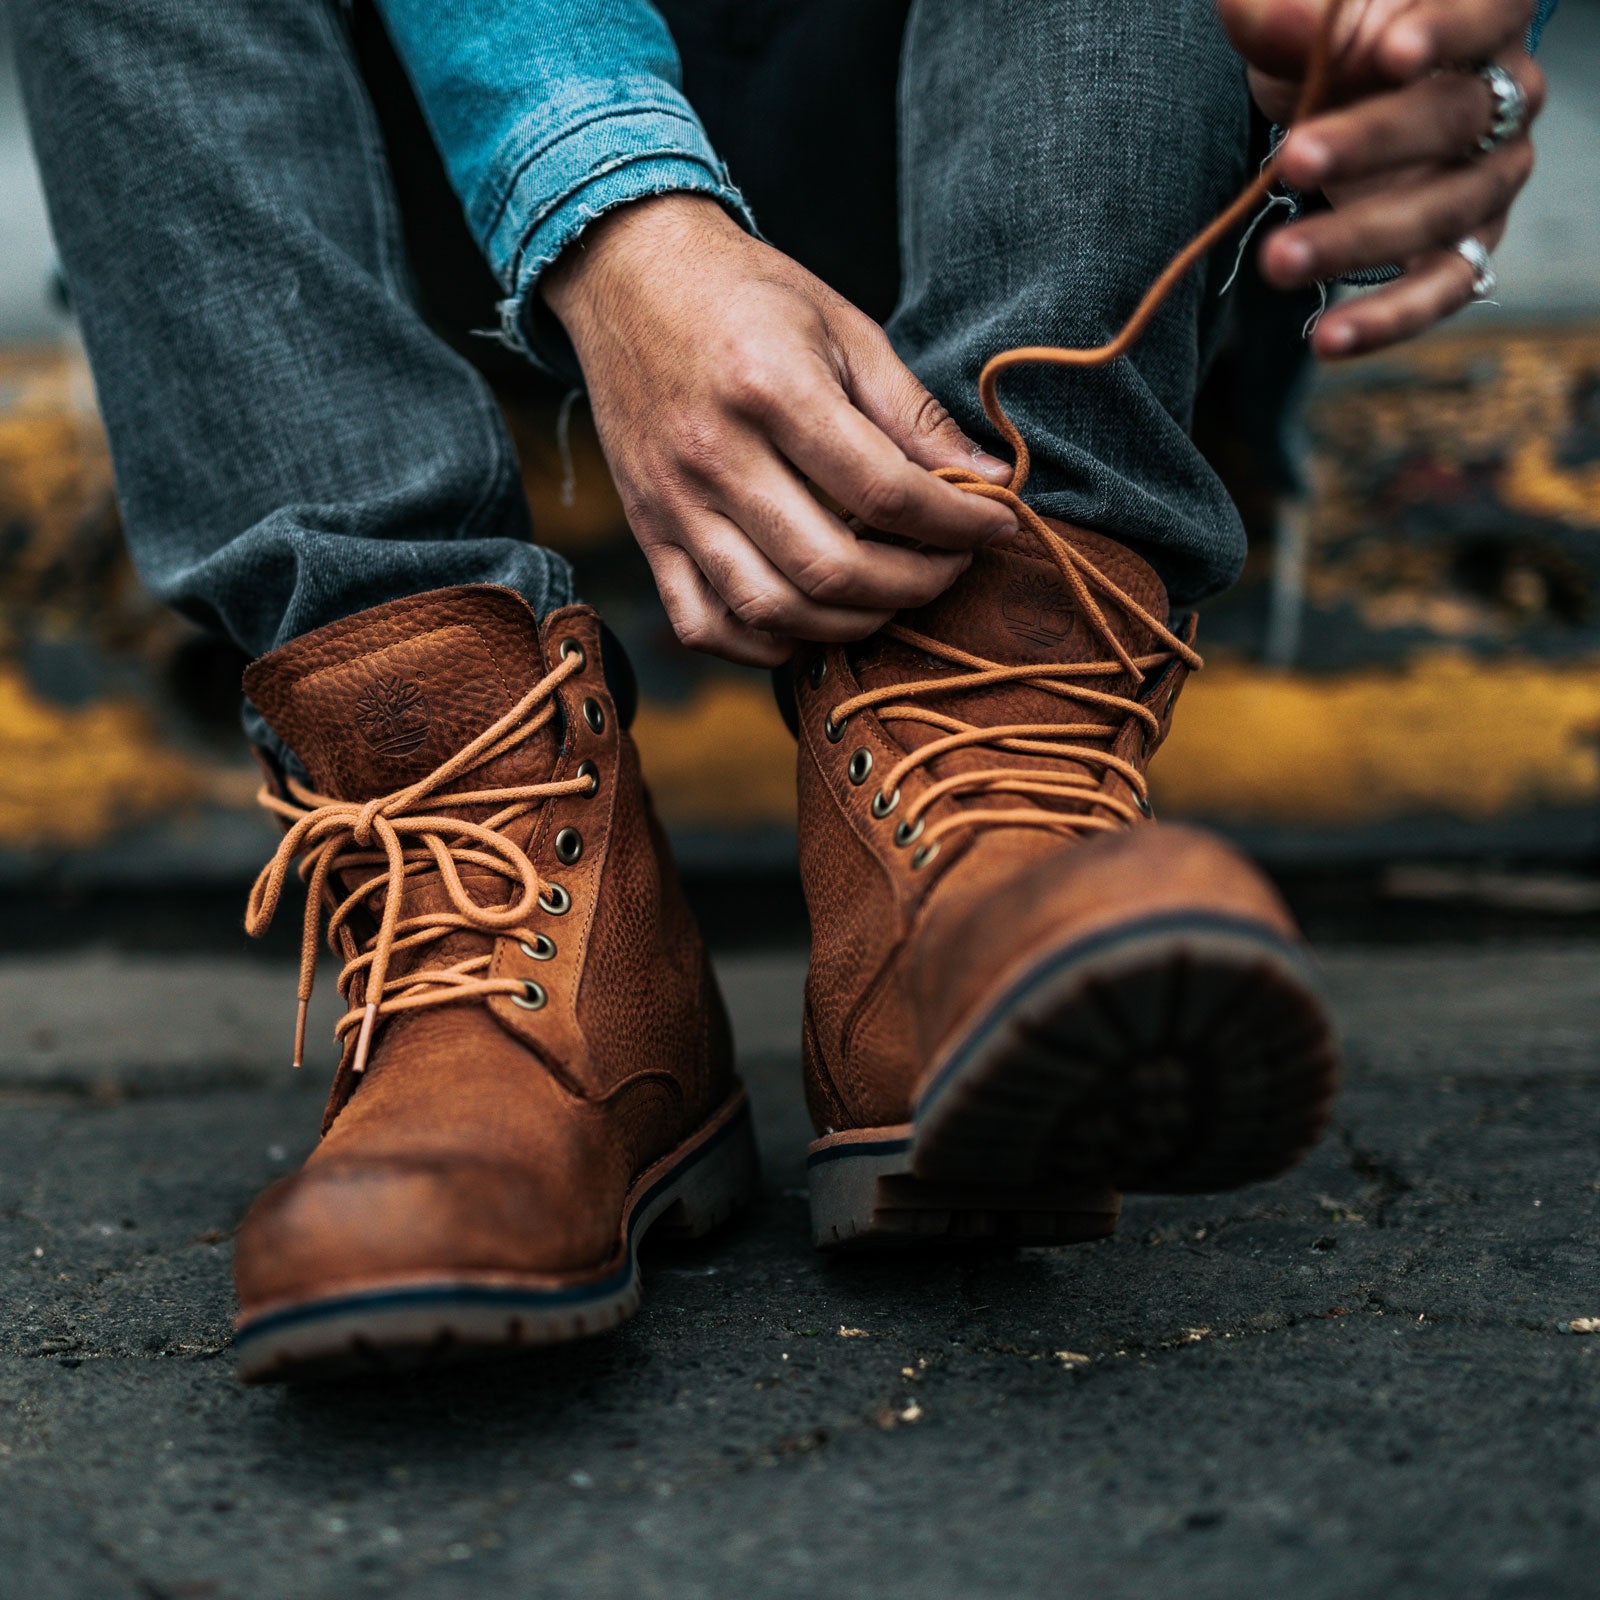 Our Favorite Men’s Leather Crossover Boots for Fall